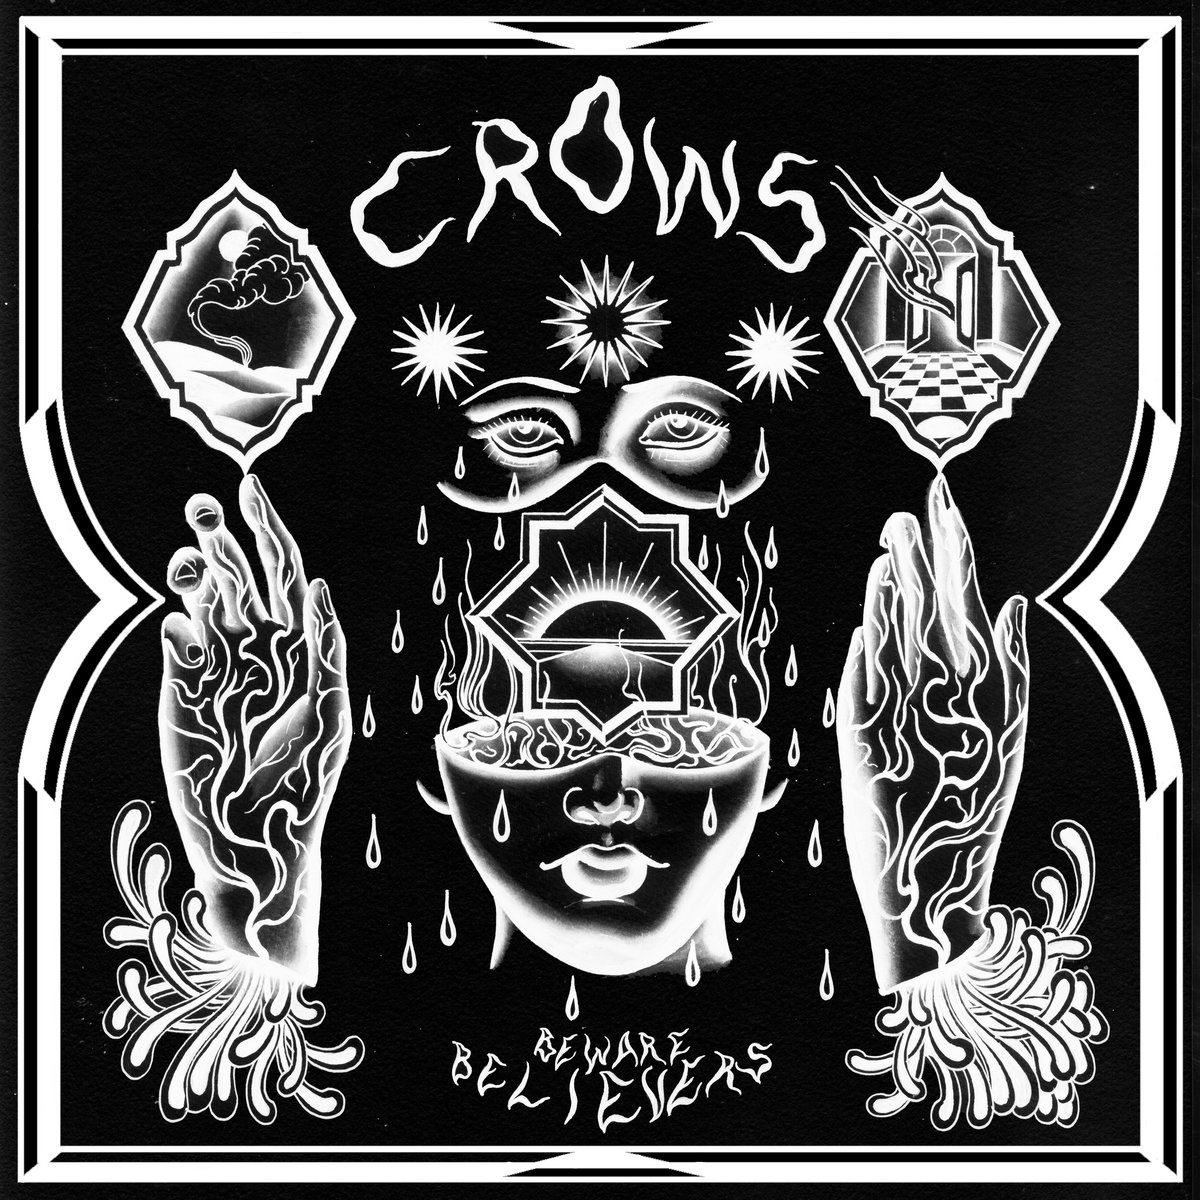 Post-punk shivers – Crows – Beware Believers